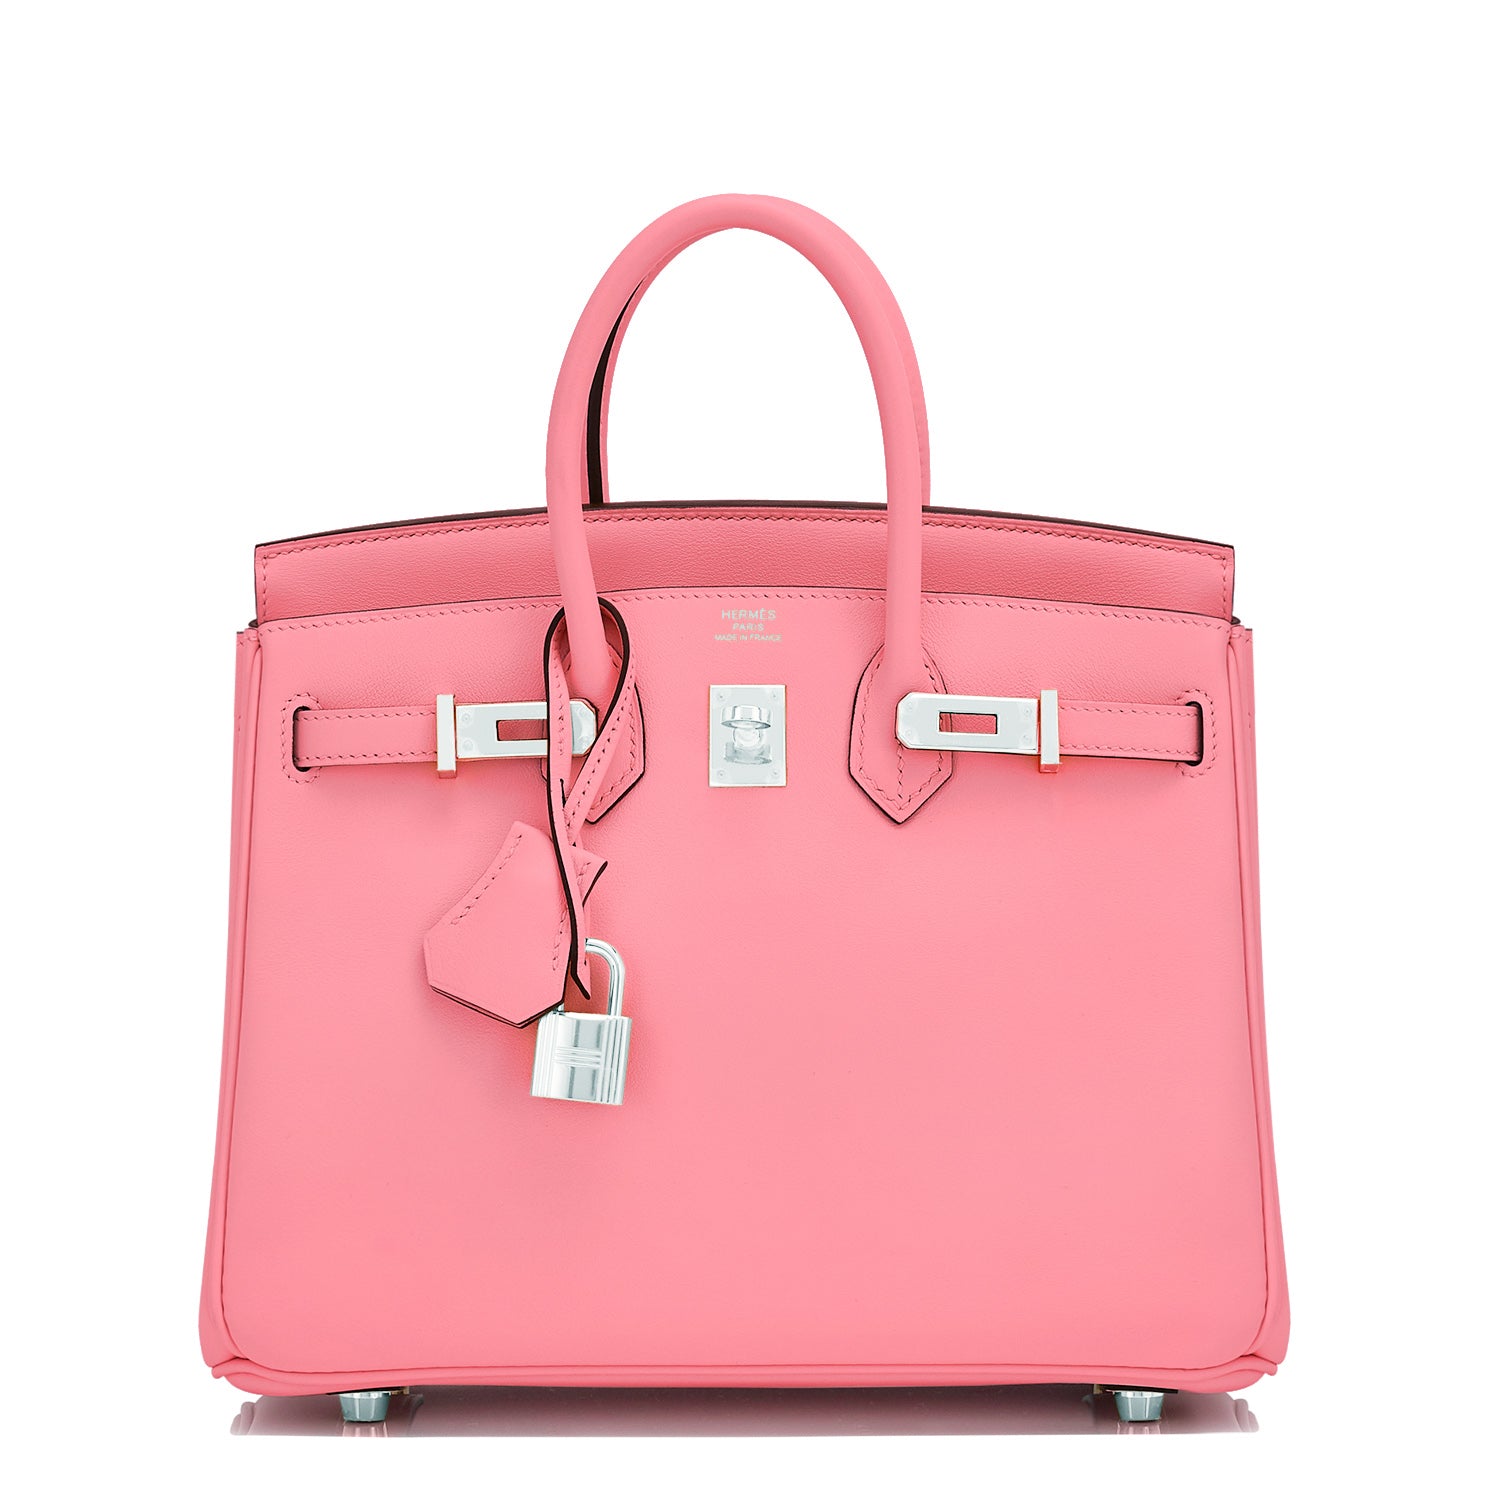 Hermes Birkin 25 in Rose D'été  How stunning is this shade of Hermès Pink?!💕Our  premium member of the week is @orange.lux.coco - WANT her Rose D'été #b25?  Click WANT IT, and